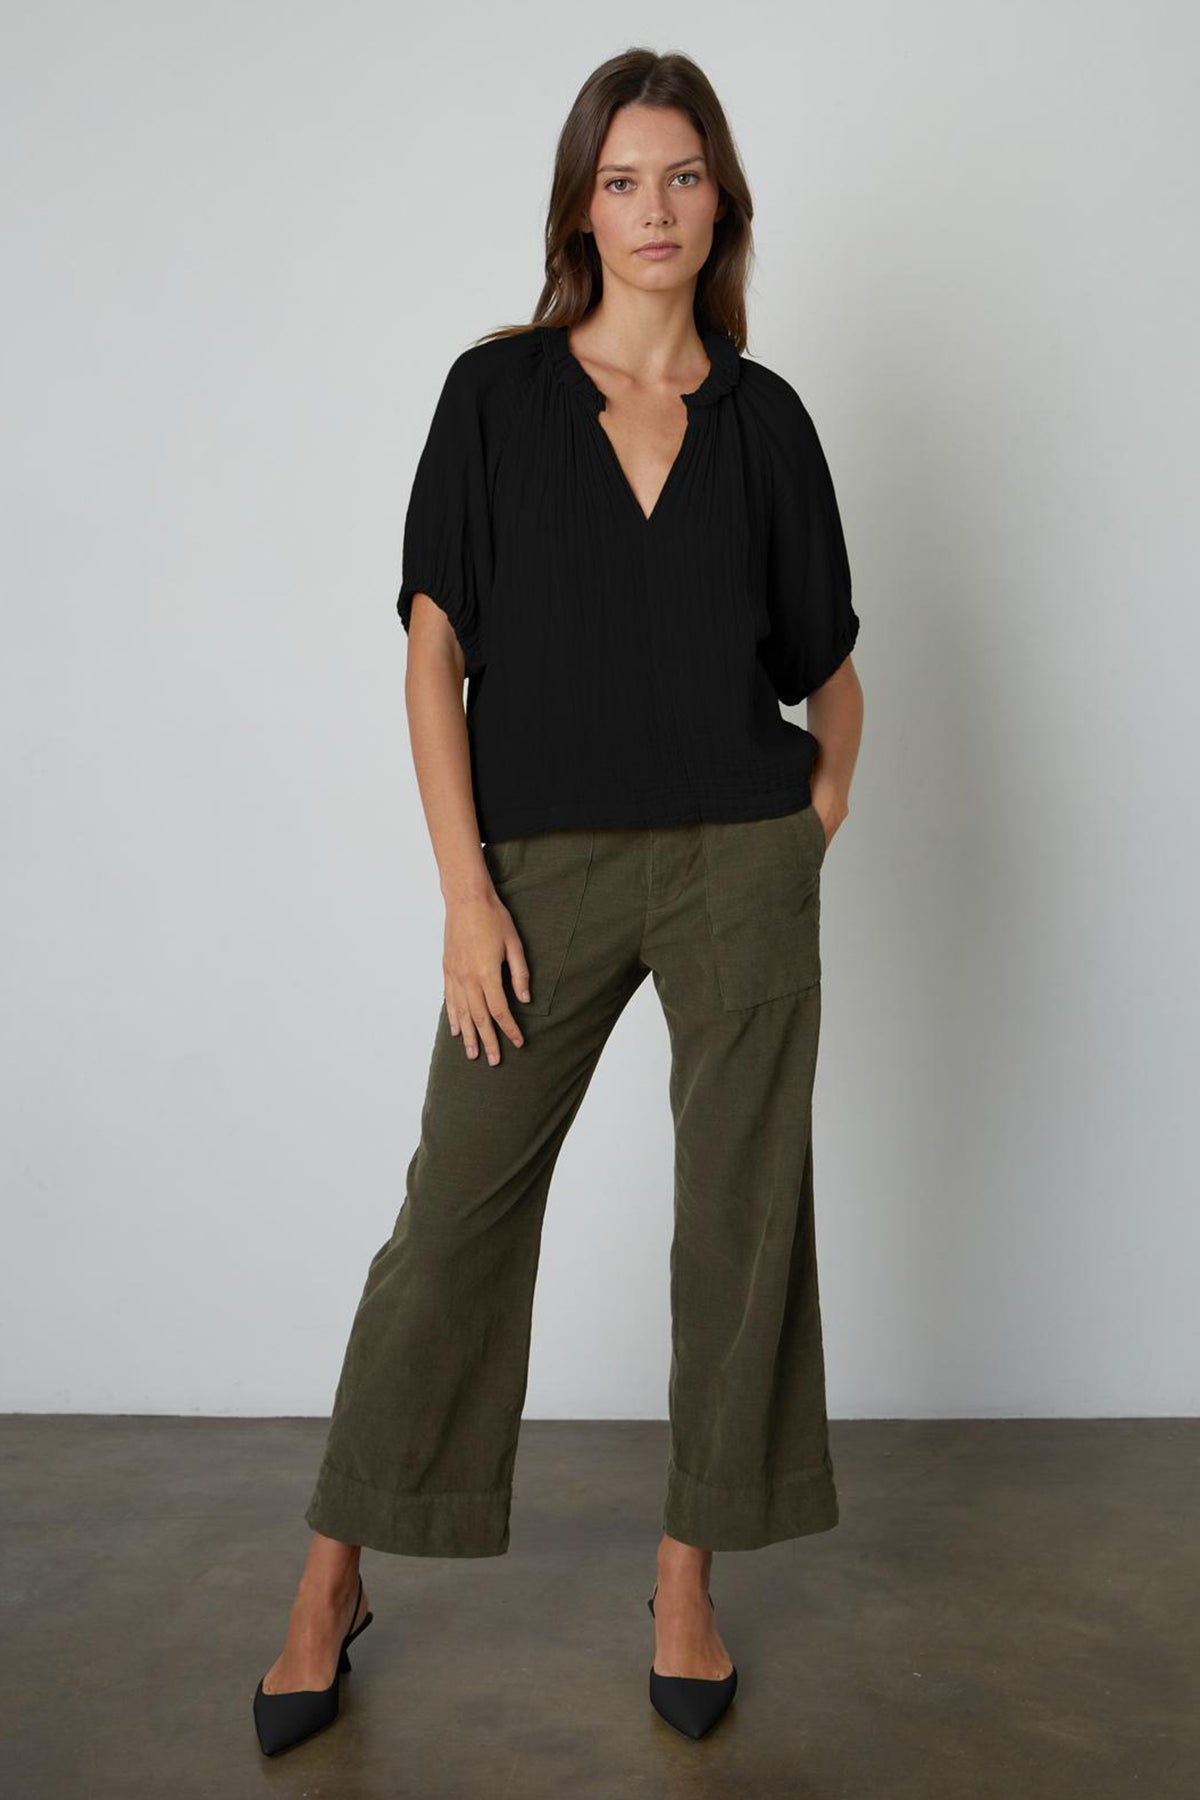 The model is wearing a black blouse and Velvet by Graham & Spencer's VERA CORDUROY WIDE LEG PANT in olive green.-26727676674241